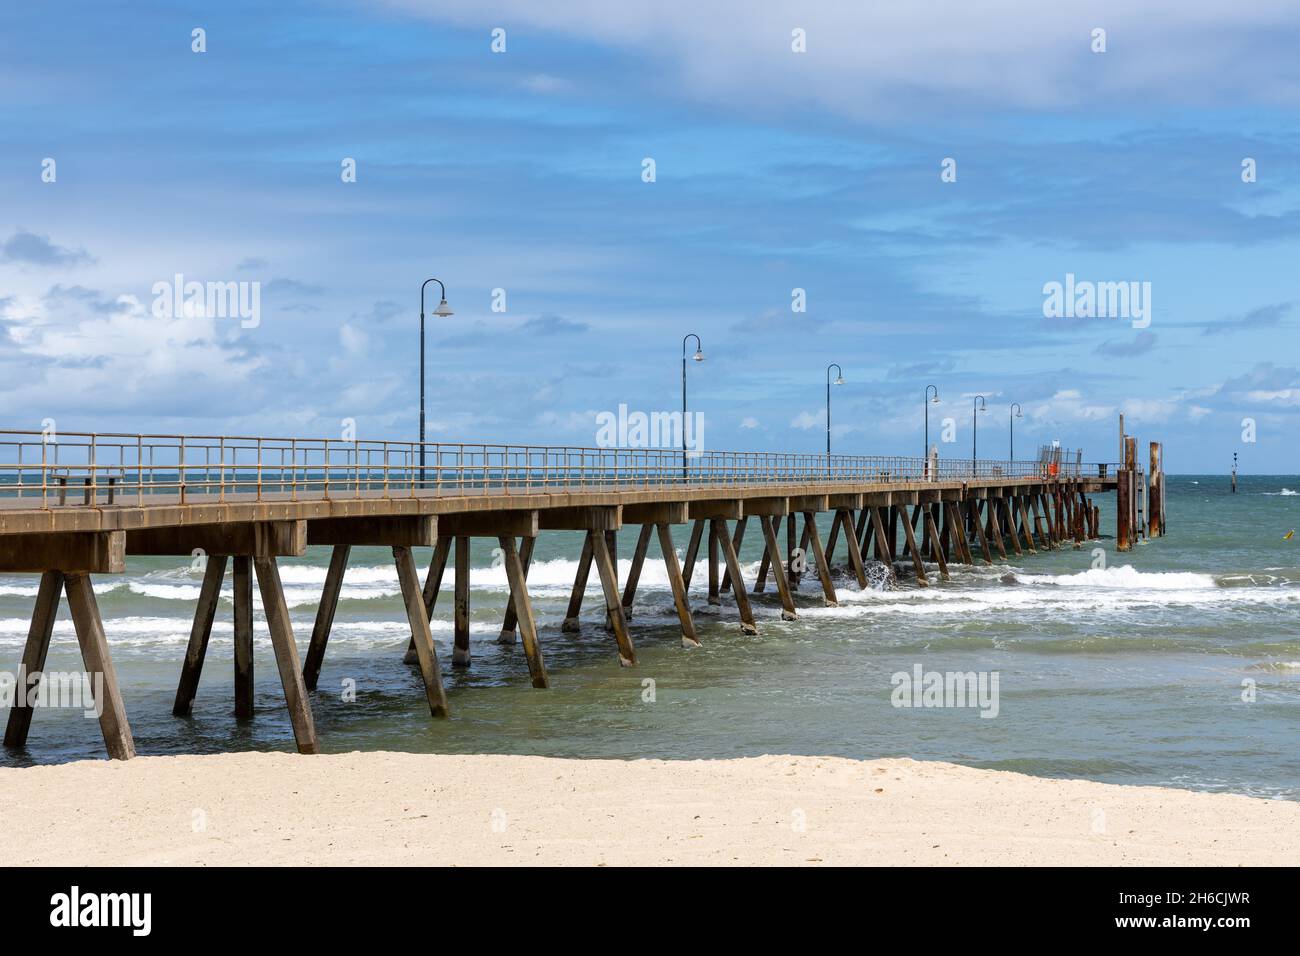 The glenelg jettty with no people on a bright sunny day in South Australia on November 15th 2021 Stock Photo